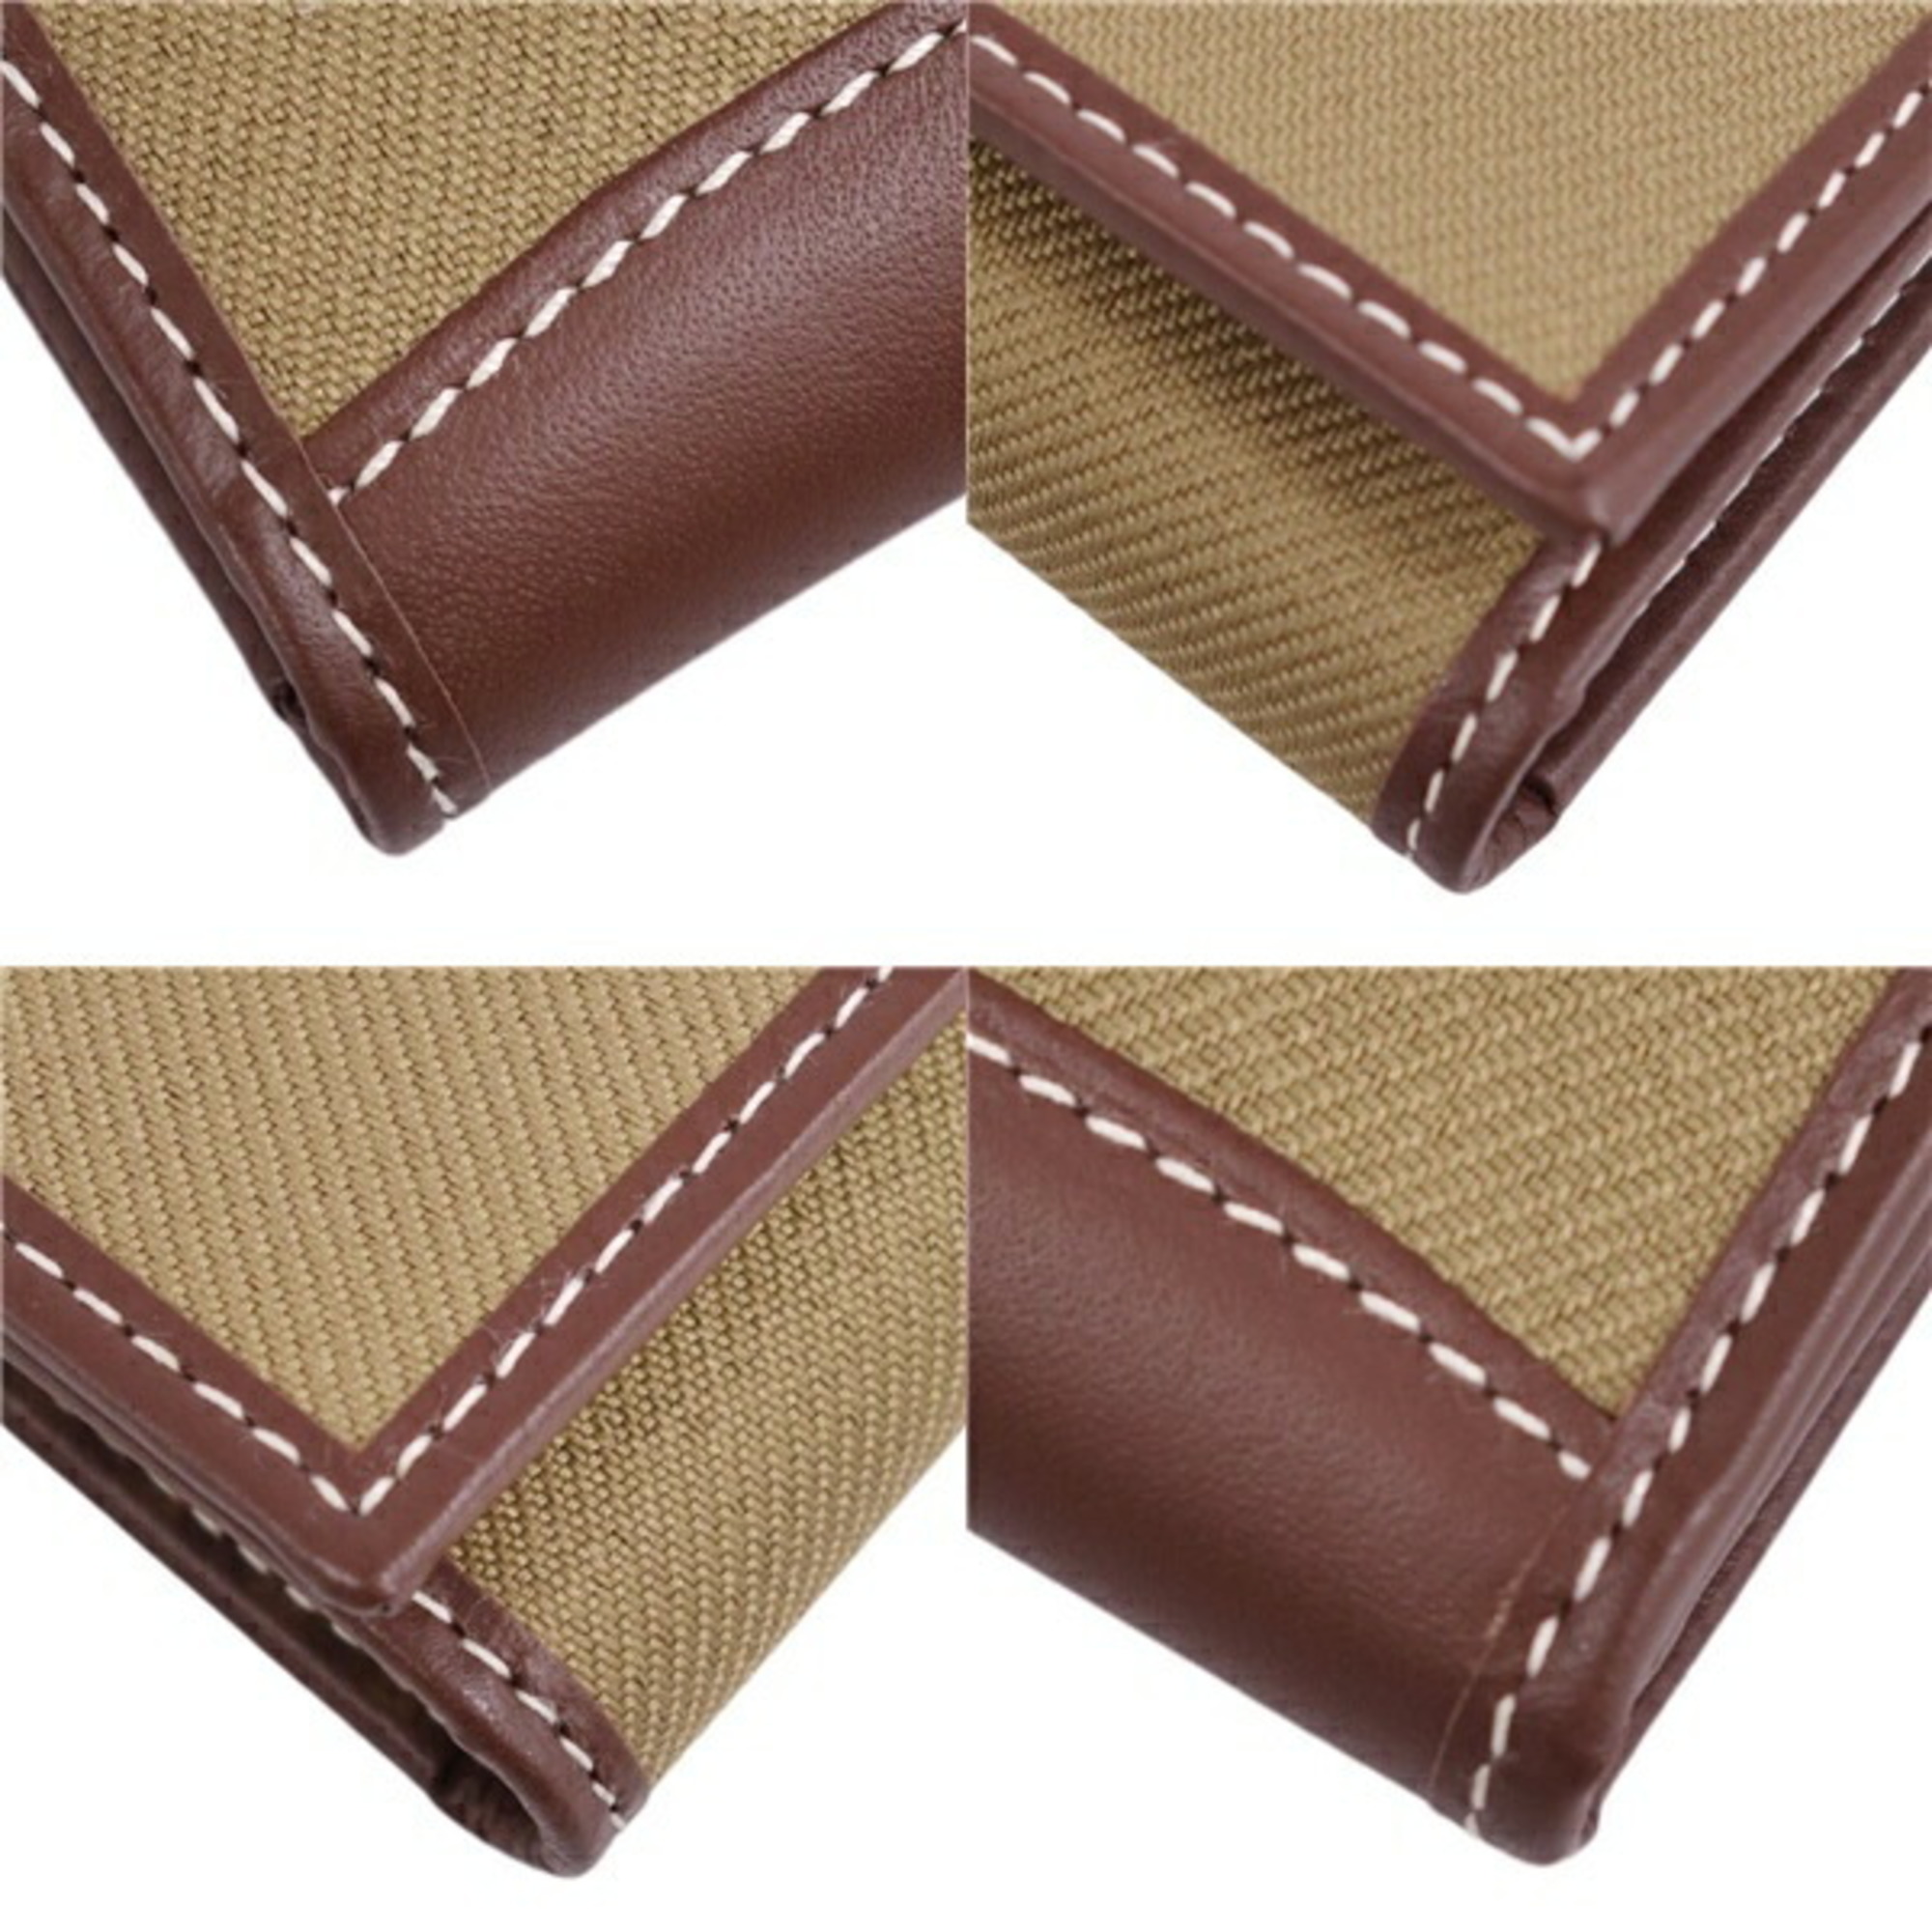 Hunting World HUNTING WORLD Key Case 6 Rows Canvas Leather Men Women Beige